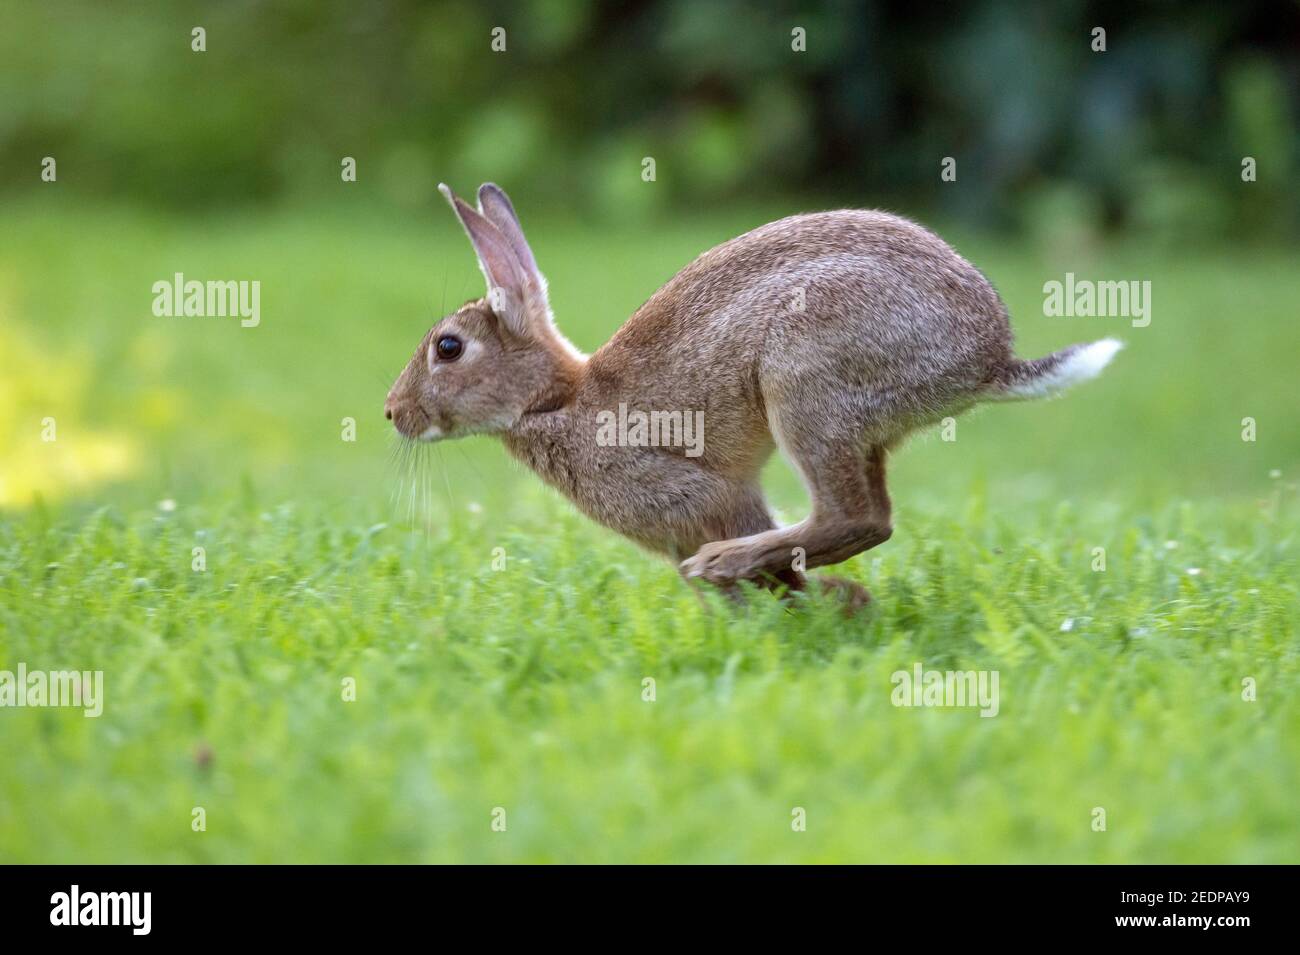 European rabbit (Oryctolagus cuniculus), young rabbit scampering over a meadow, side view, Germany Stock Photo